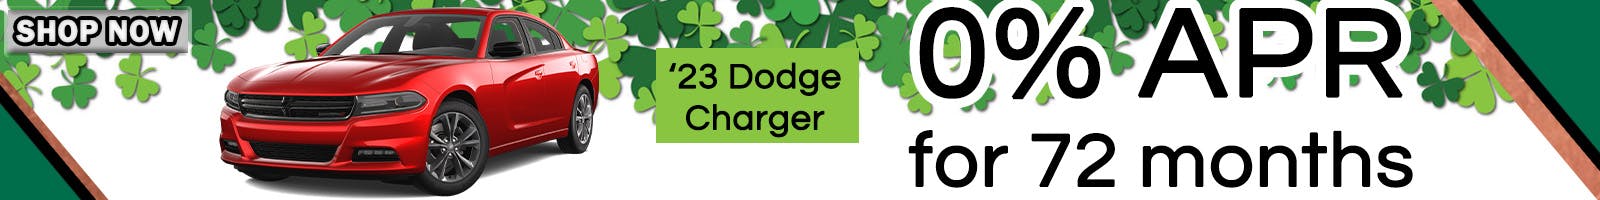 Dodge Incentive/Charger 2-4.2024 | Butte Auto Group